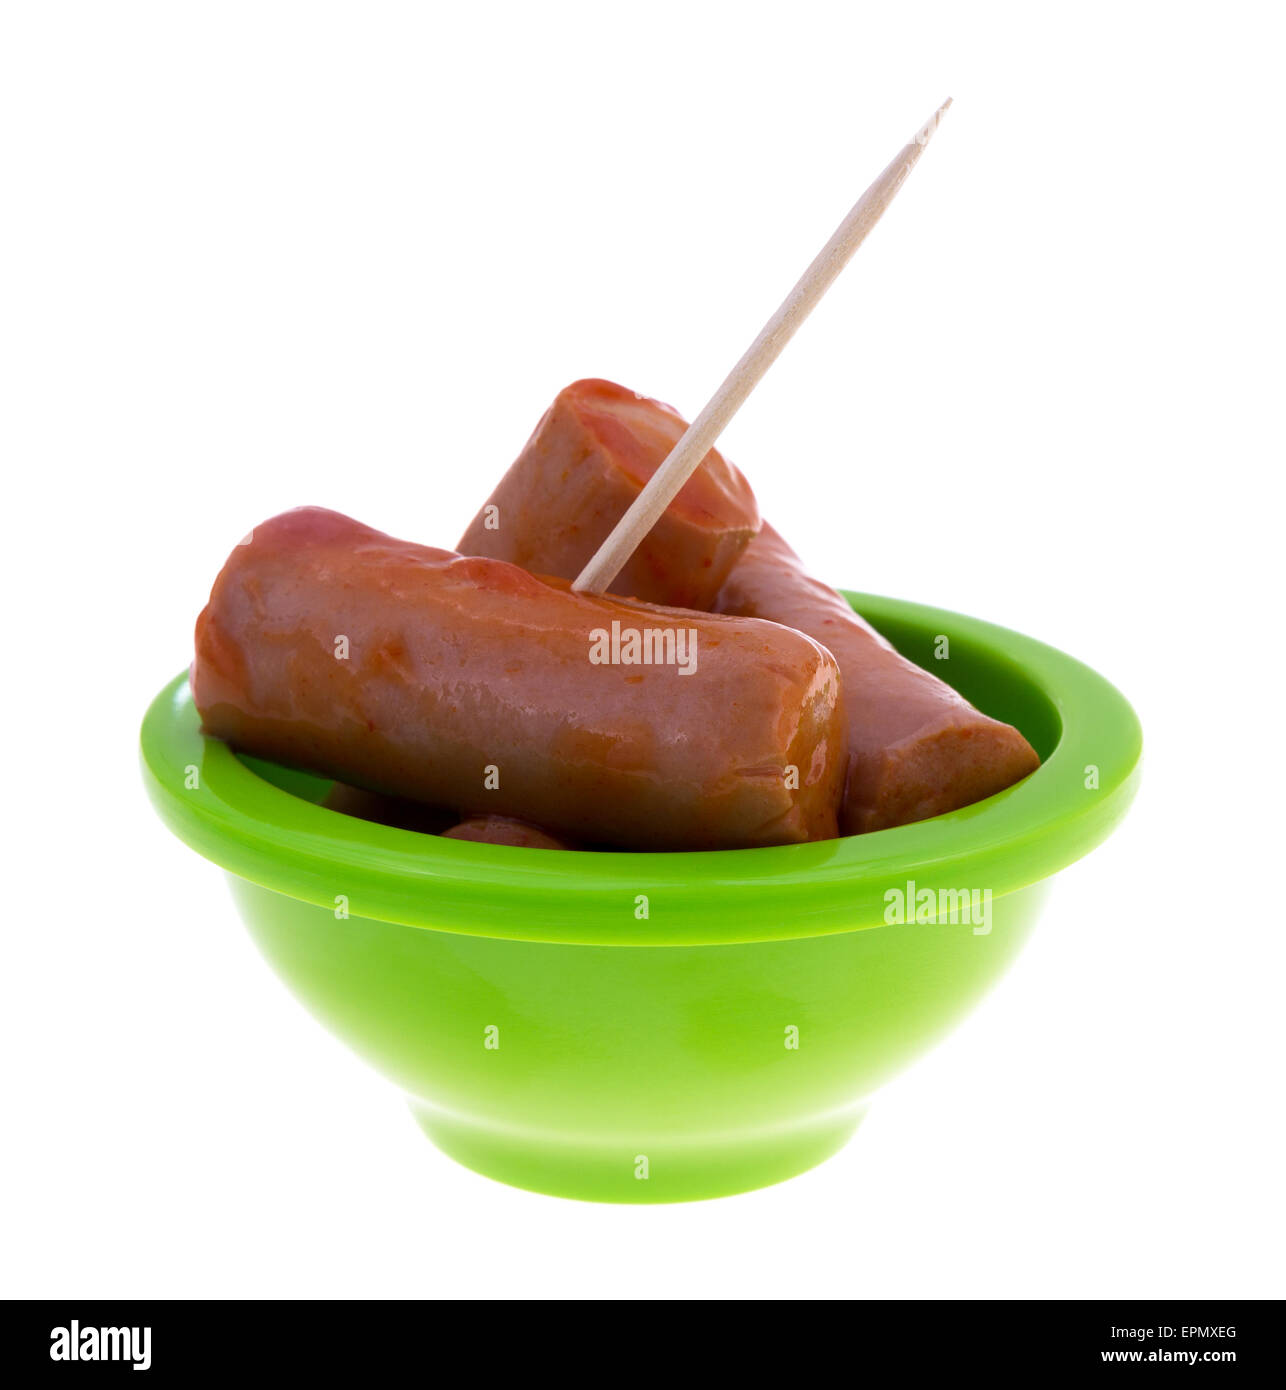 A small green bowl filled with hot and spicy bite size sausages with a toothpick inserted in a sausage. Stock Photo